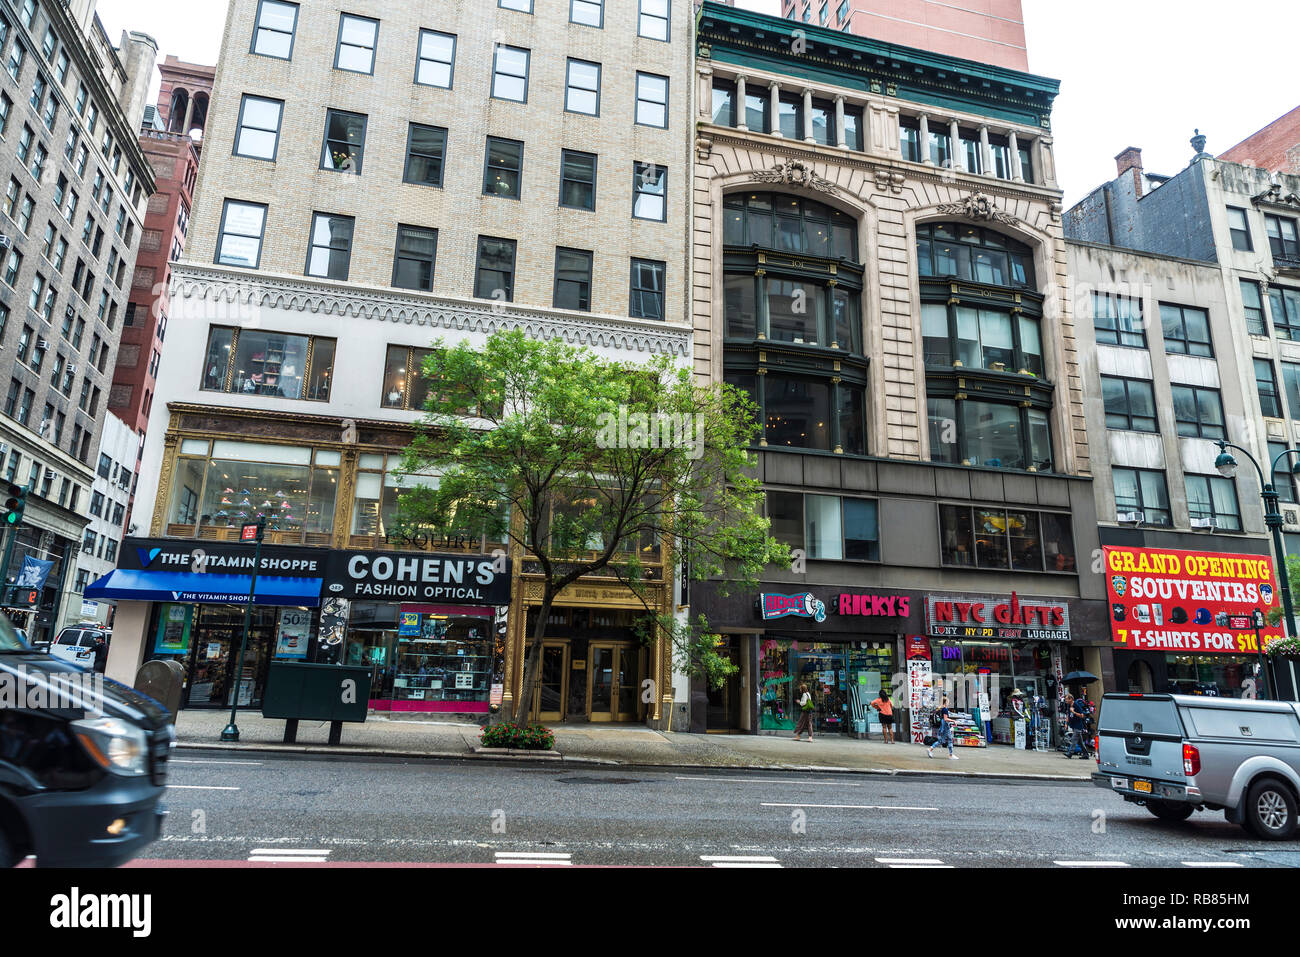 New York City, USA - July 28, 2018: Fifth Avenue (5th Avenue) with luxury  shops and people around in Manhattan in New York City, USA Stock Photo -  Alamy